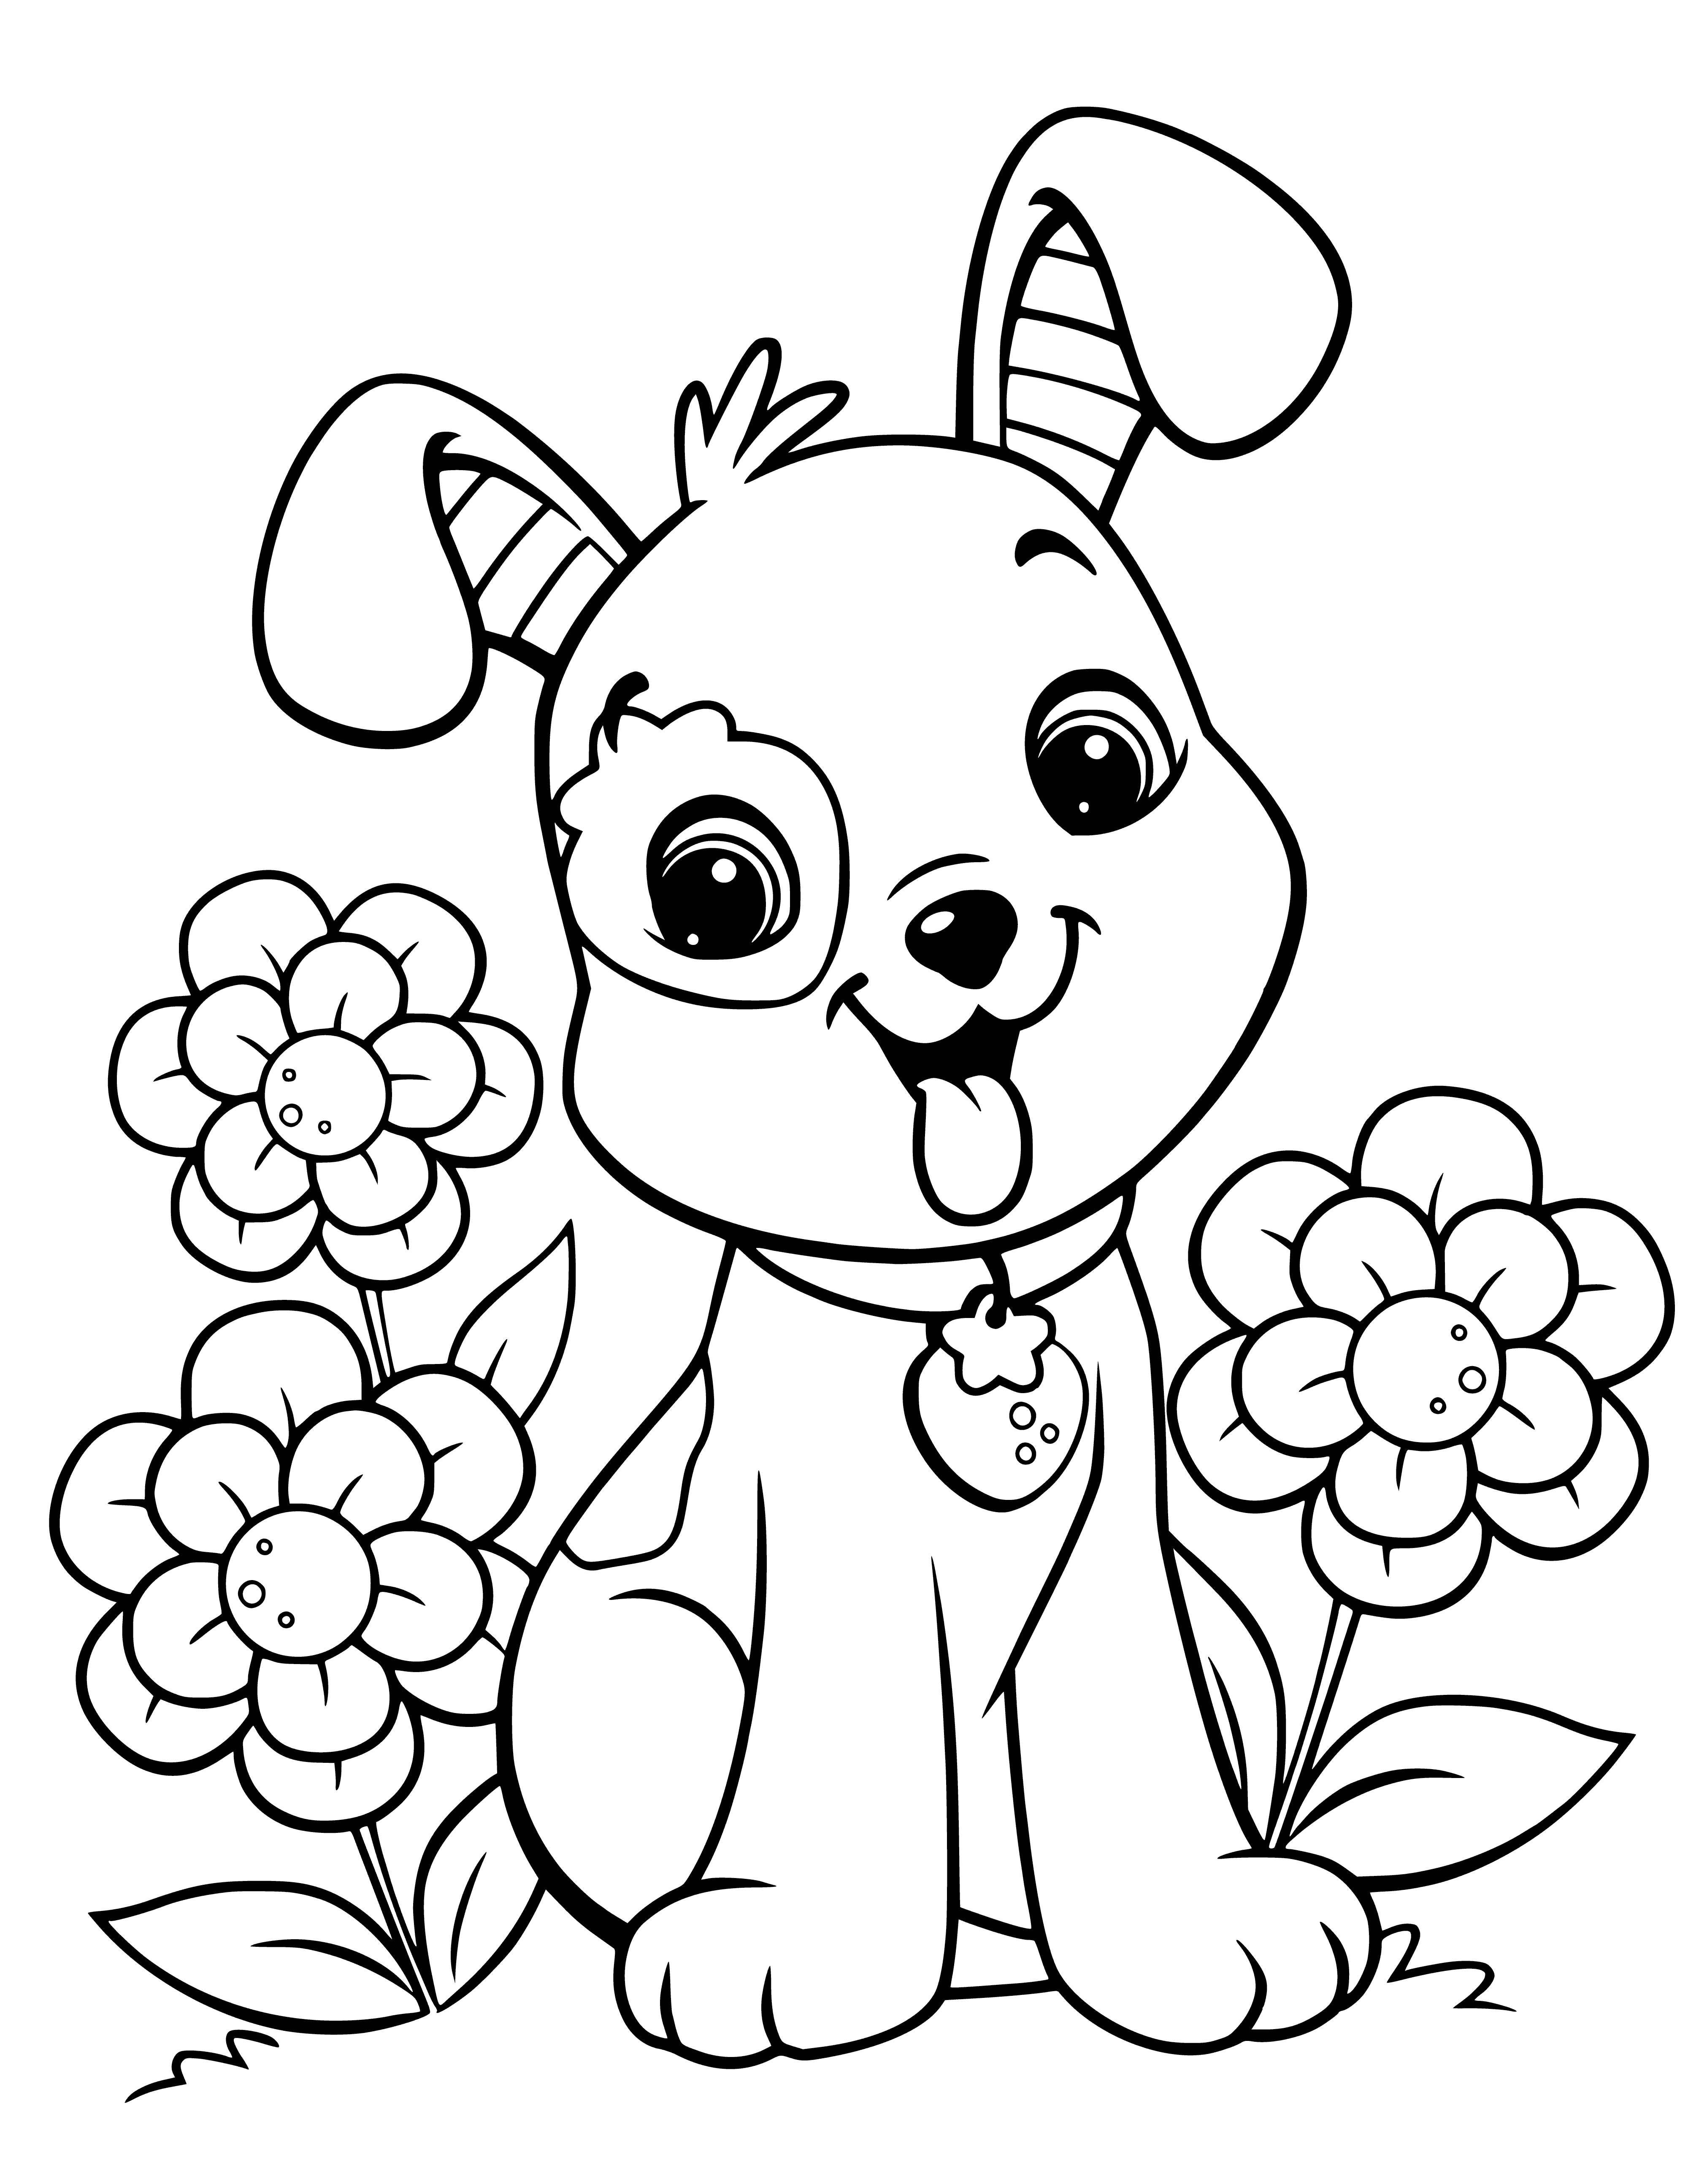 coloring page: Cute strawberry-colored puppy with brown nose, dark eyes, open mouth, tongue out, and a collar with a bow.